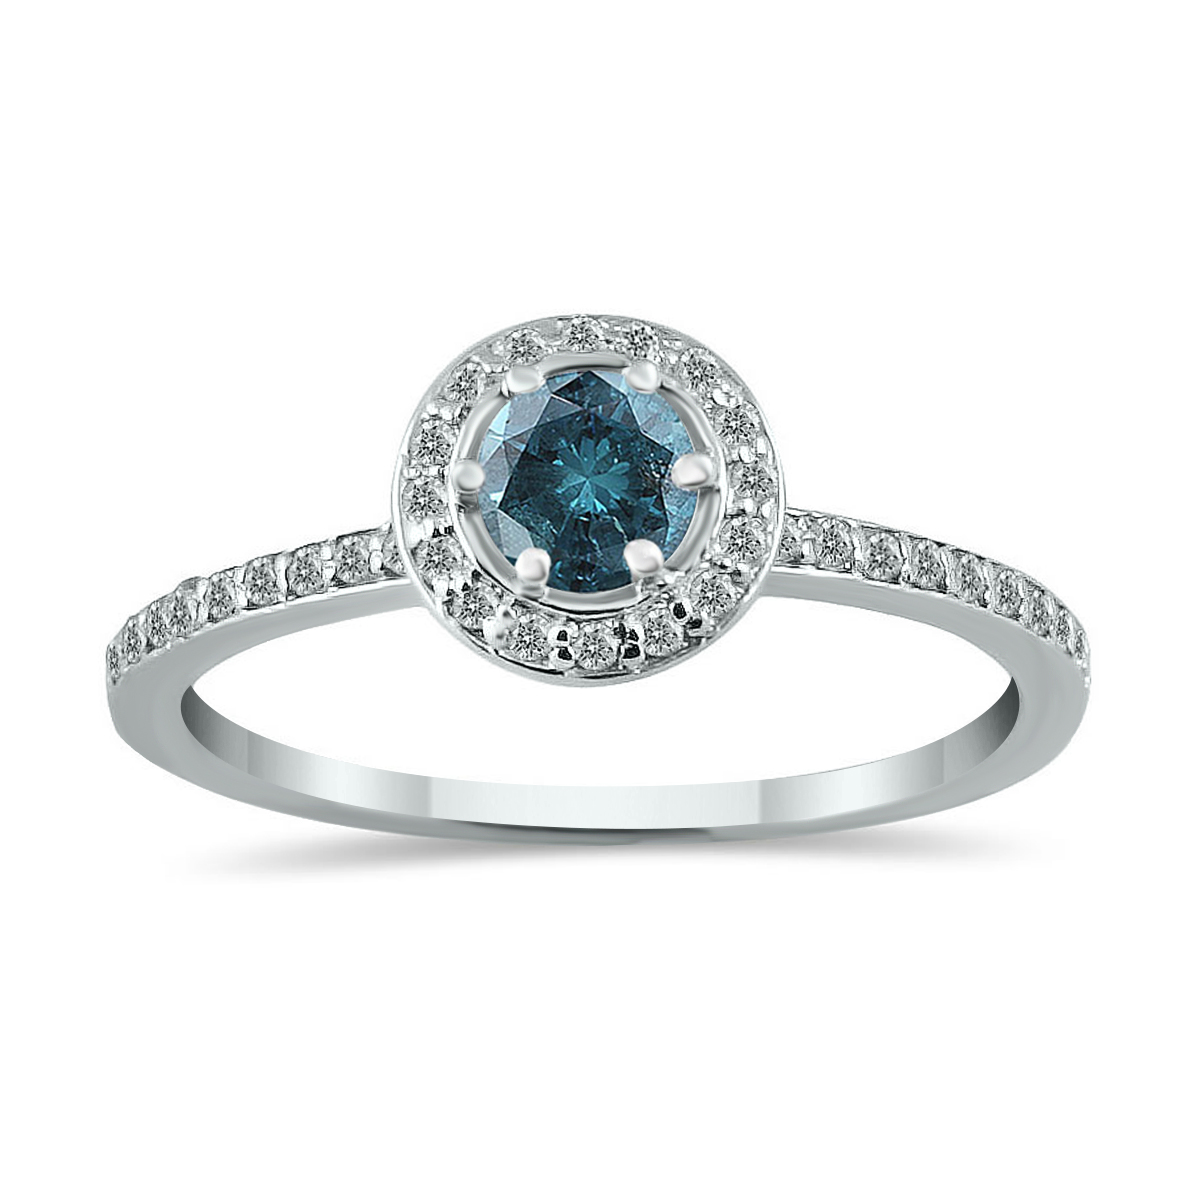 1/2 Carat Blue and White Diamond Ring in 14K White Gold